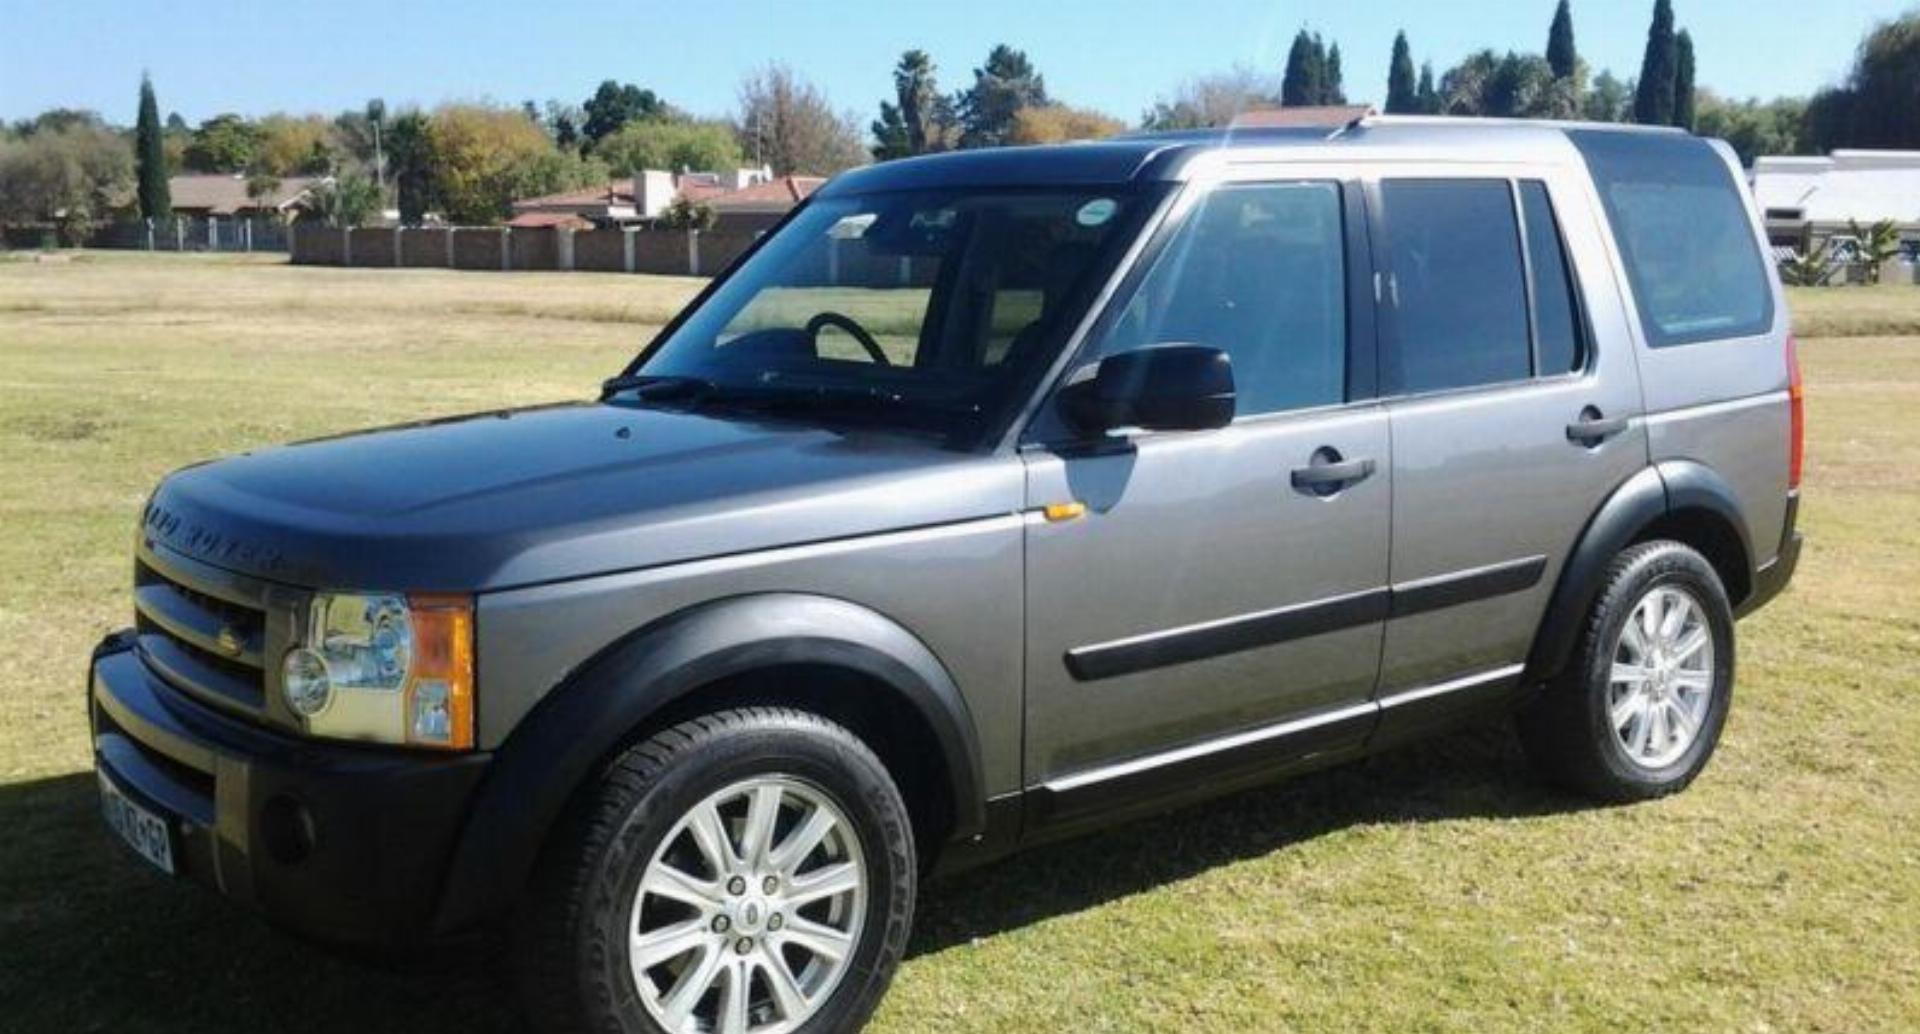 Used Land Rover Discovery 3 TDV6 Hse A/T 2007 on auction